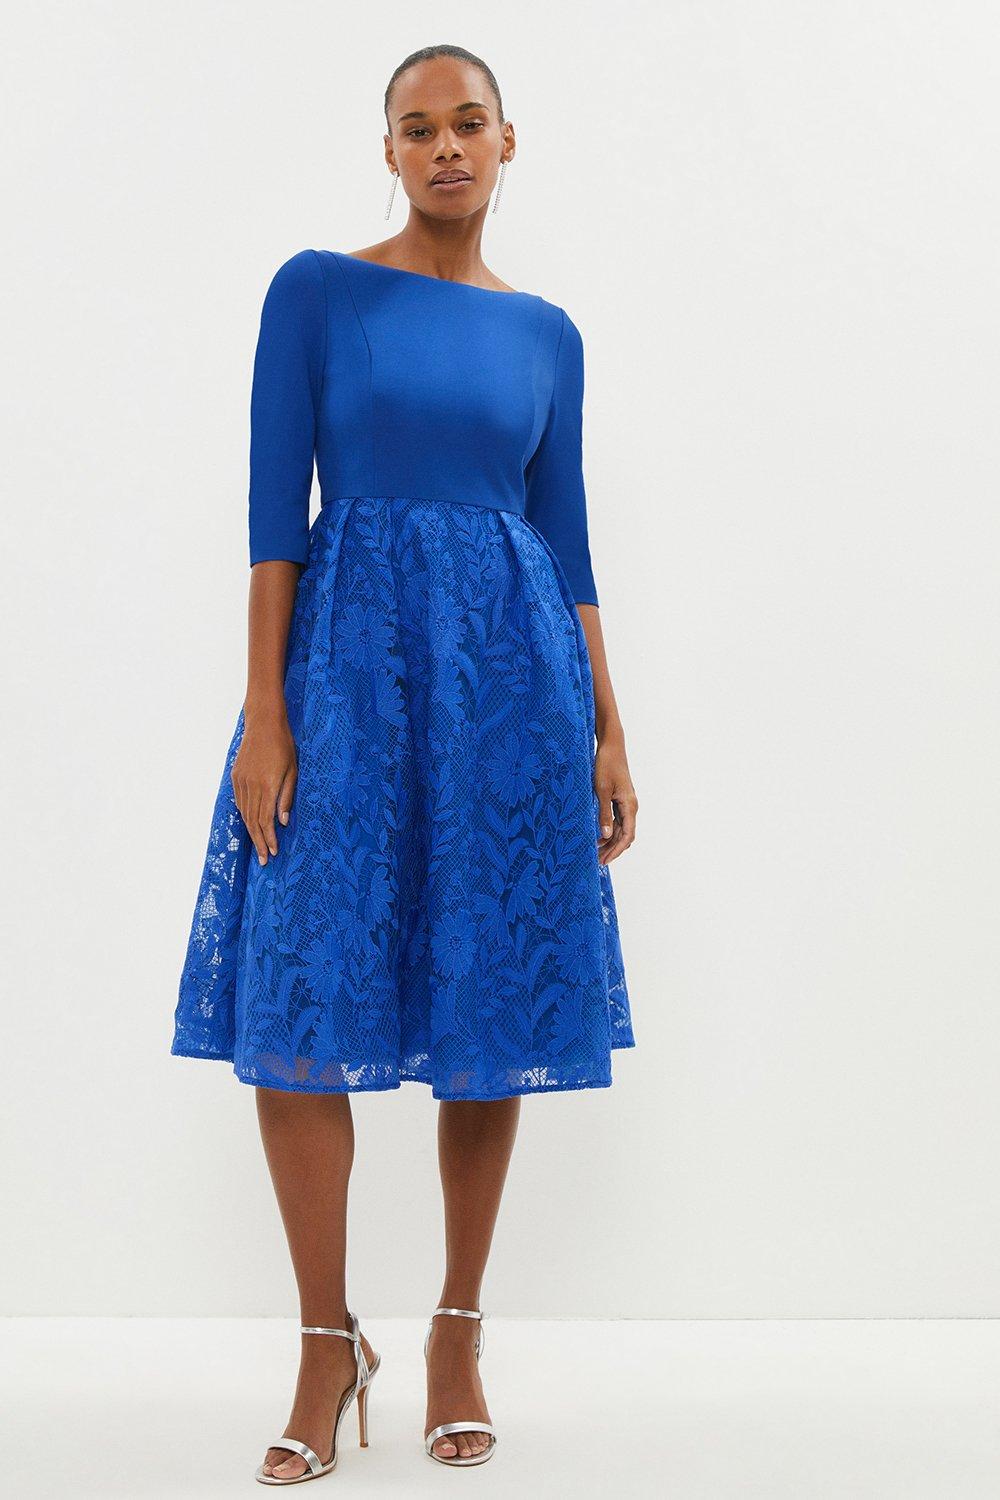 2 In 1 Embroidered Skirt Midi Dress - Blue